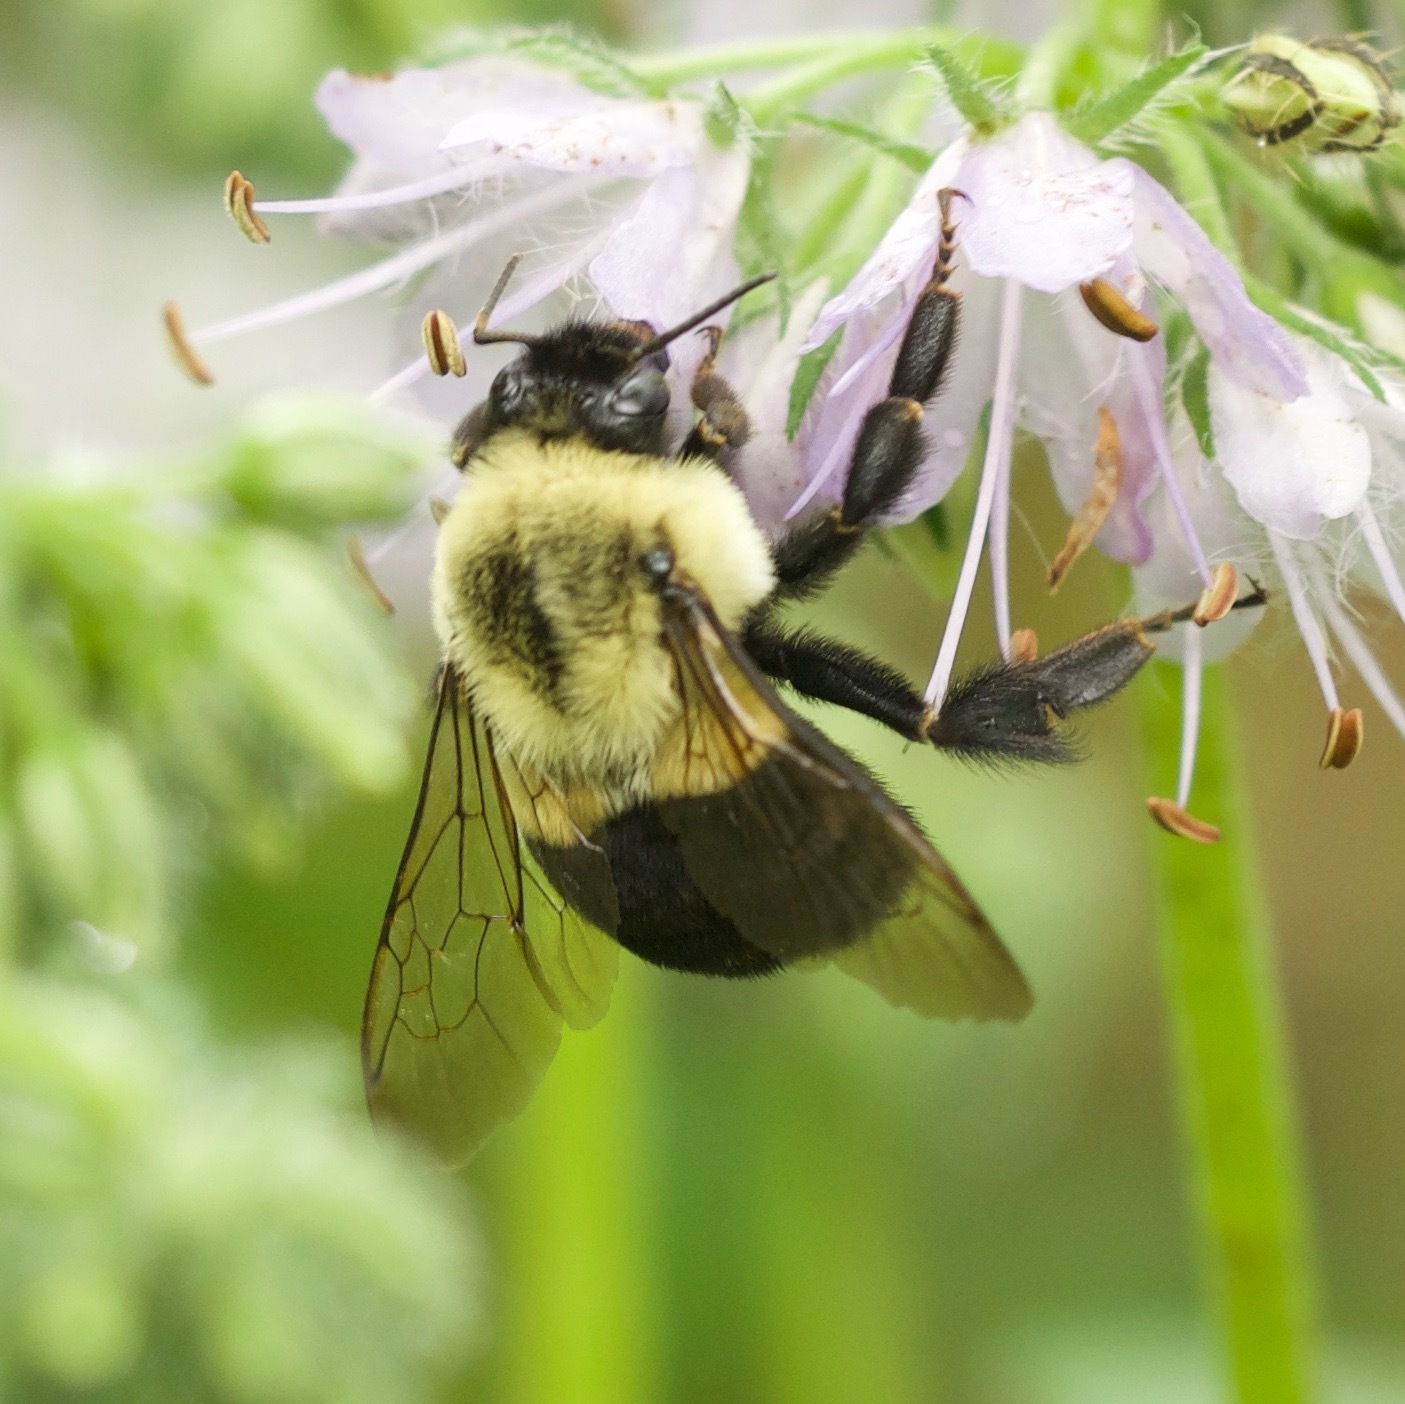 A hairy, yellow and black bumblebee hangs upside down from the pale purple petals of a Virginia waterleaf plant. Its wings are transparent gray and it has segmented legs.